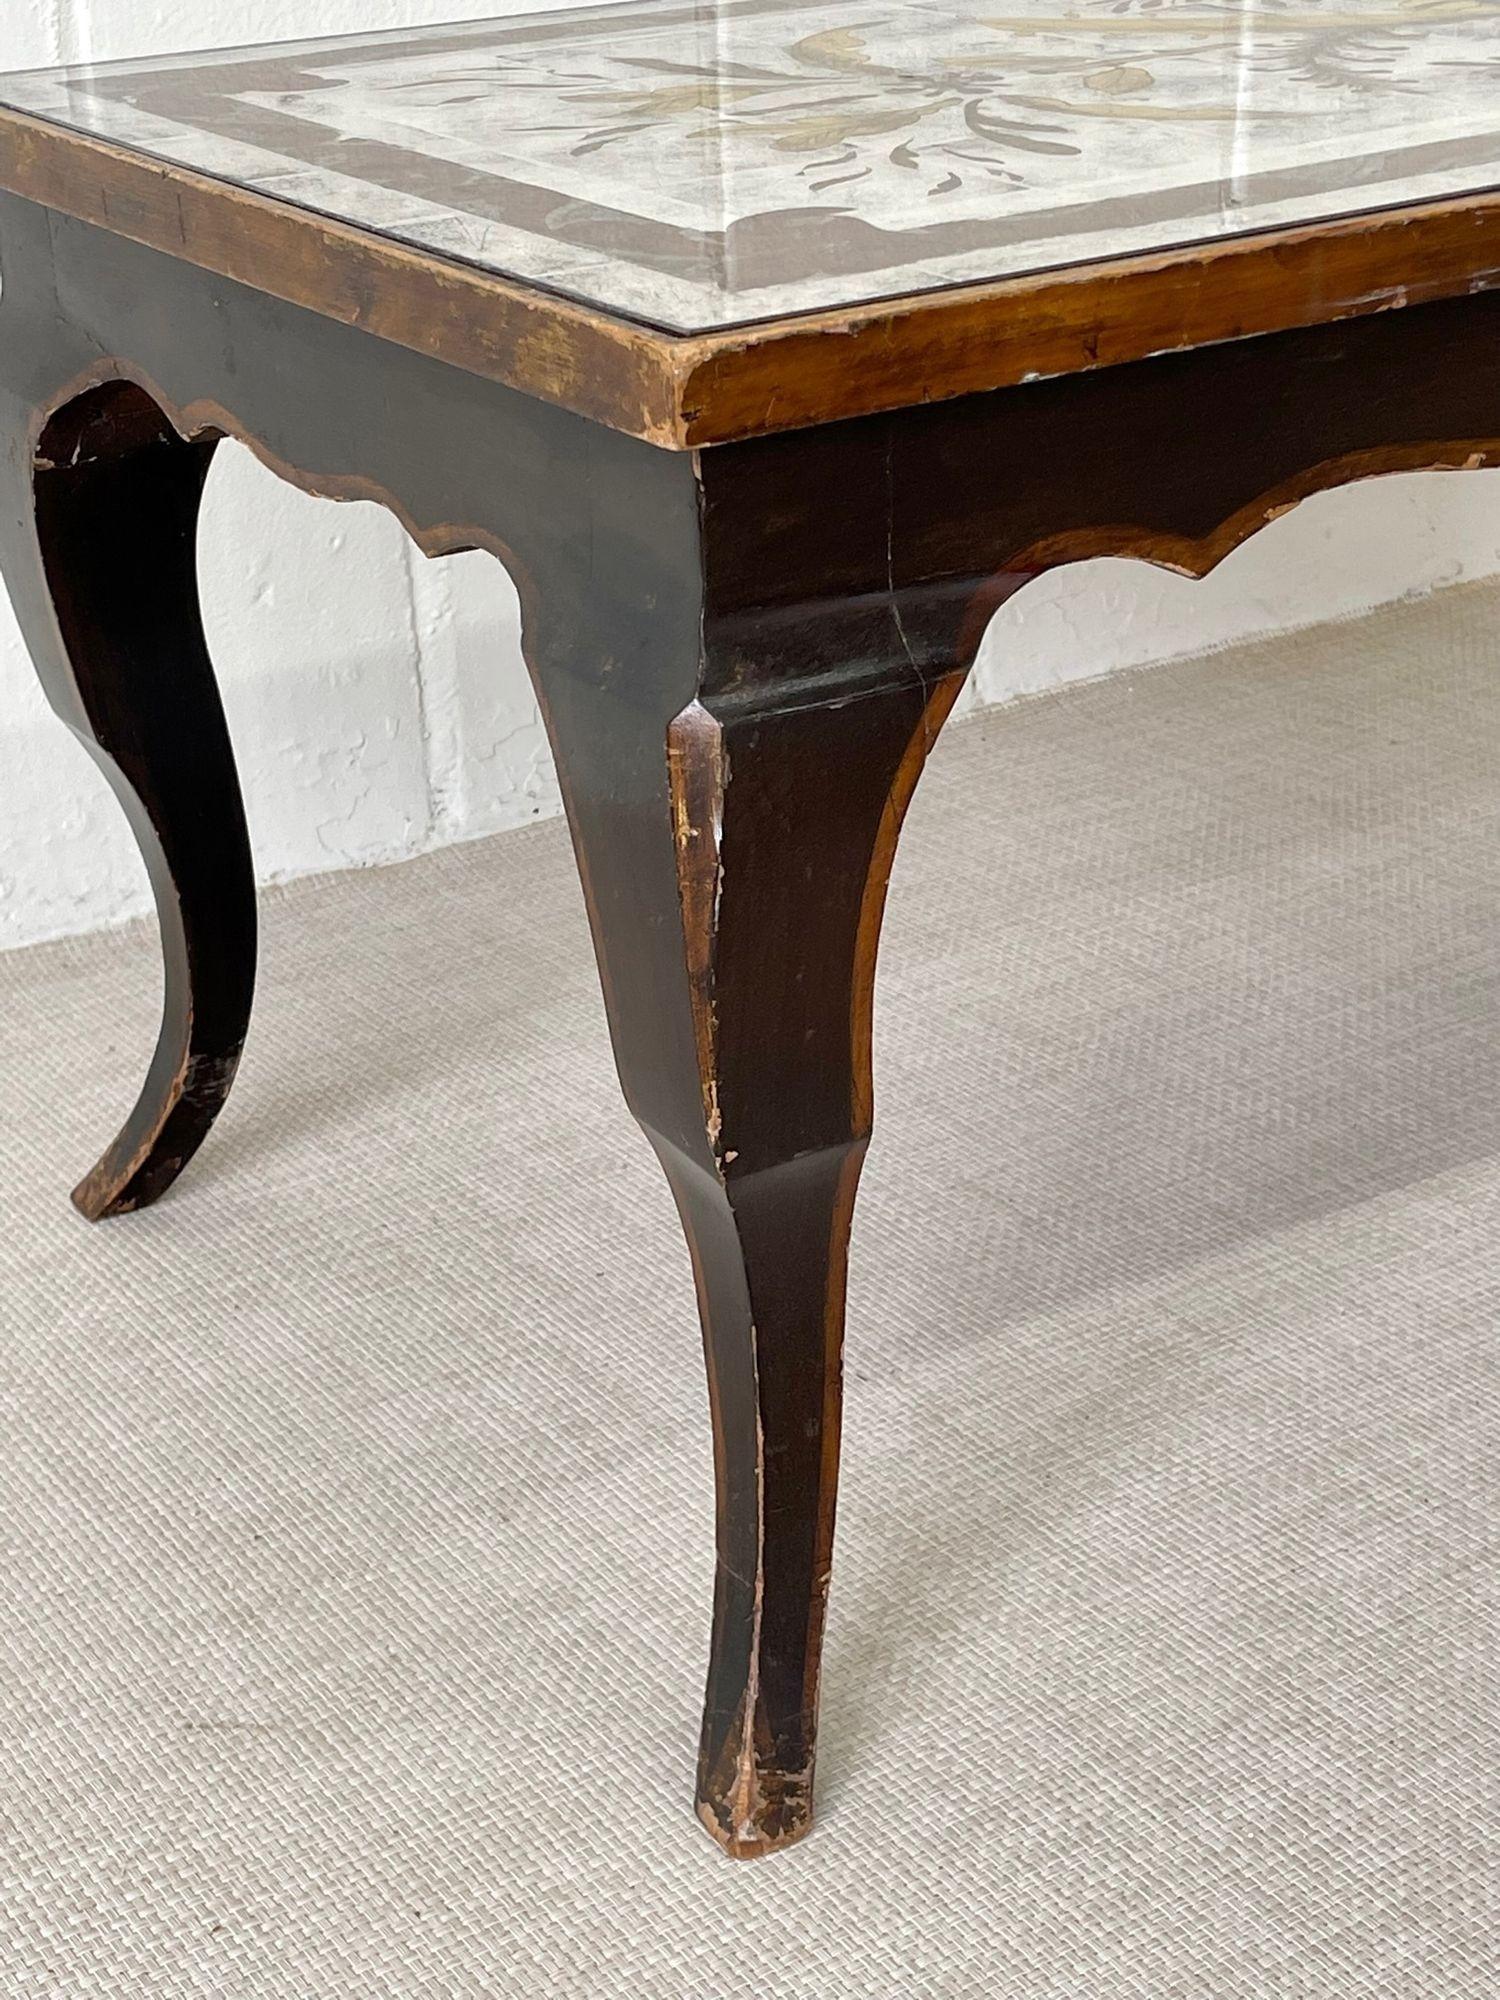 20th Century Hollywood Regency Eglomise Coffee or Cocktail Table, Ebony, Mirrored, Jansen